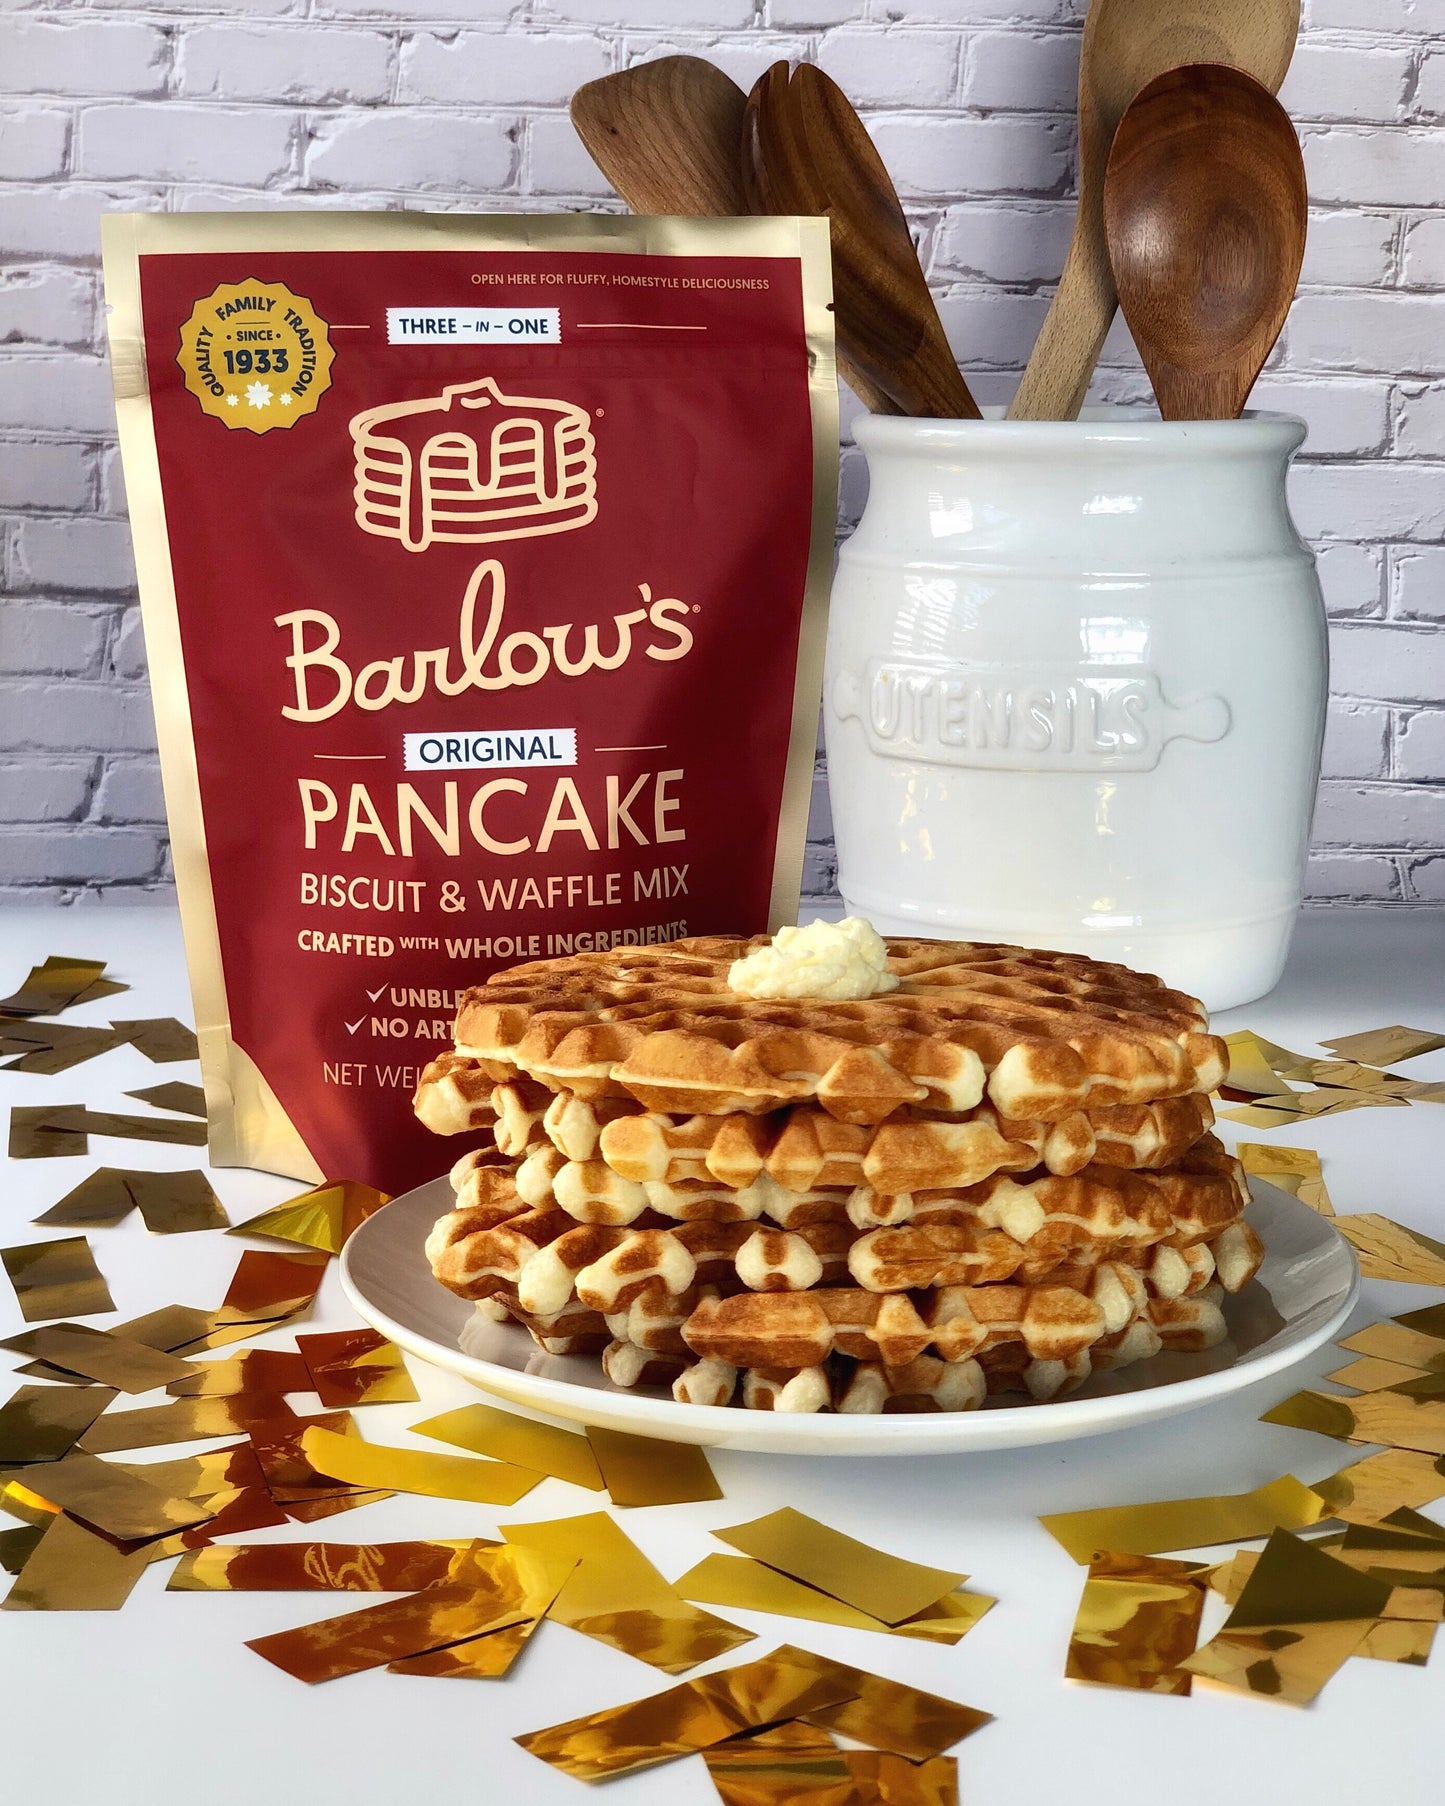 3 in 1 Whole Wheat Pancake, Biscuit & Waffle Mix 32 oz. - 2 Packs